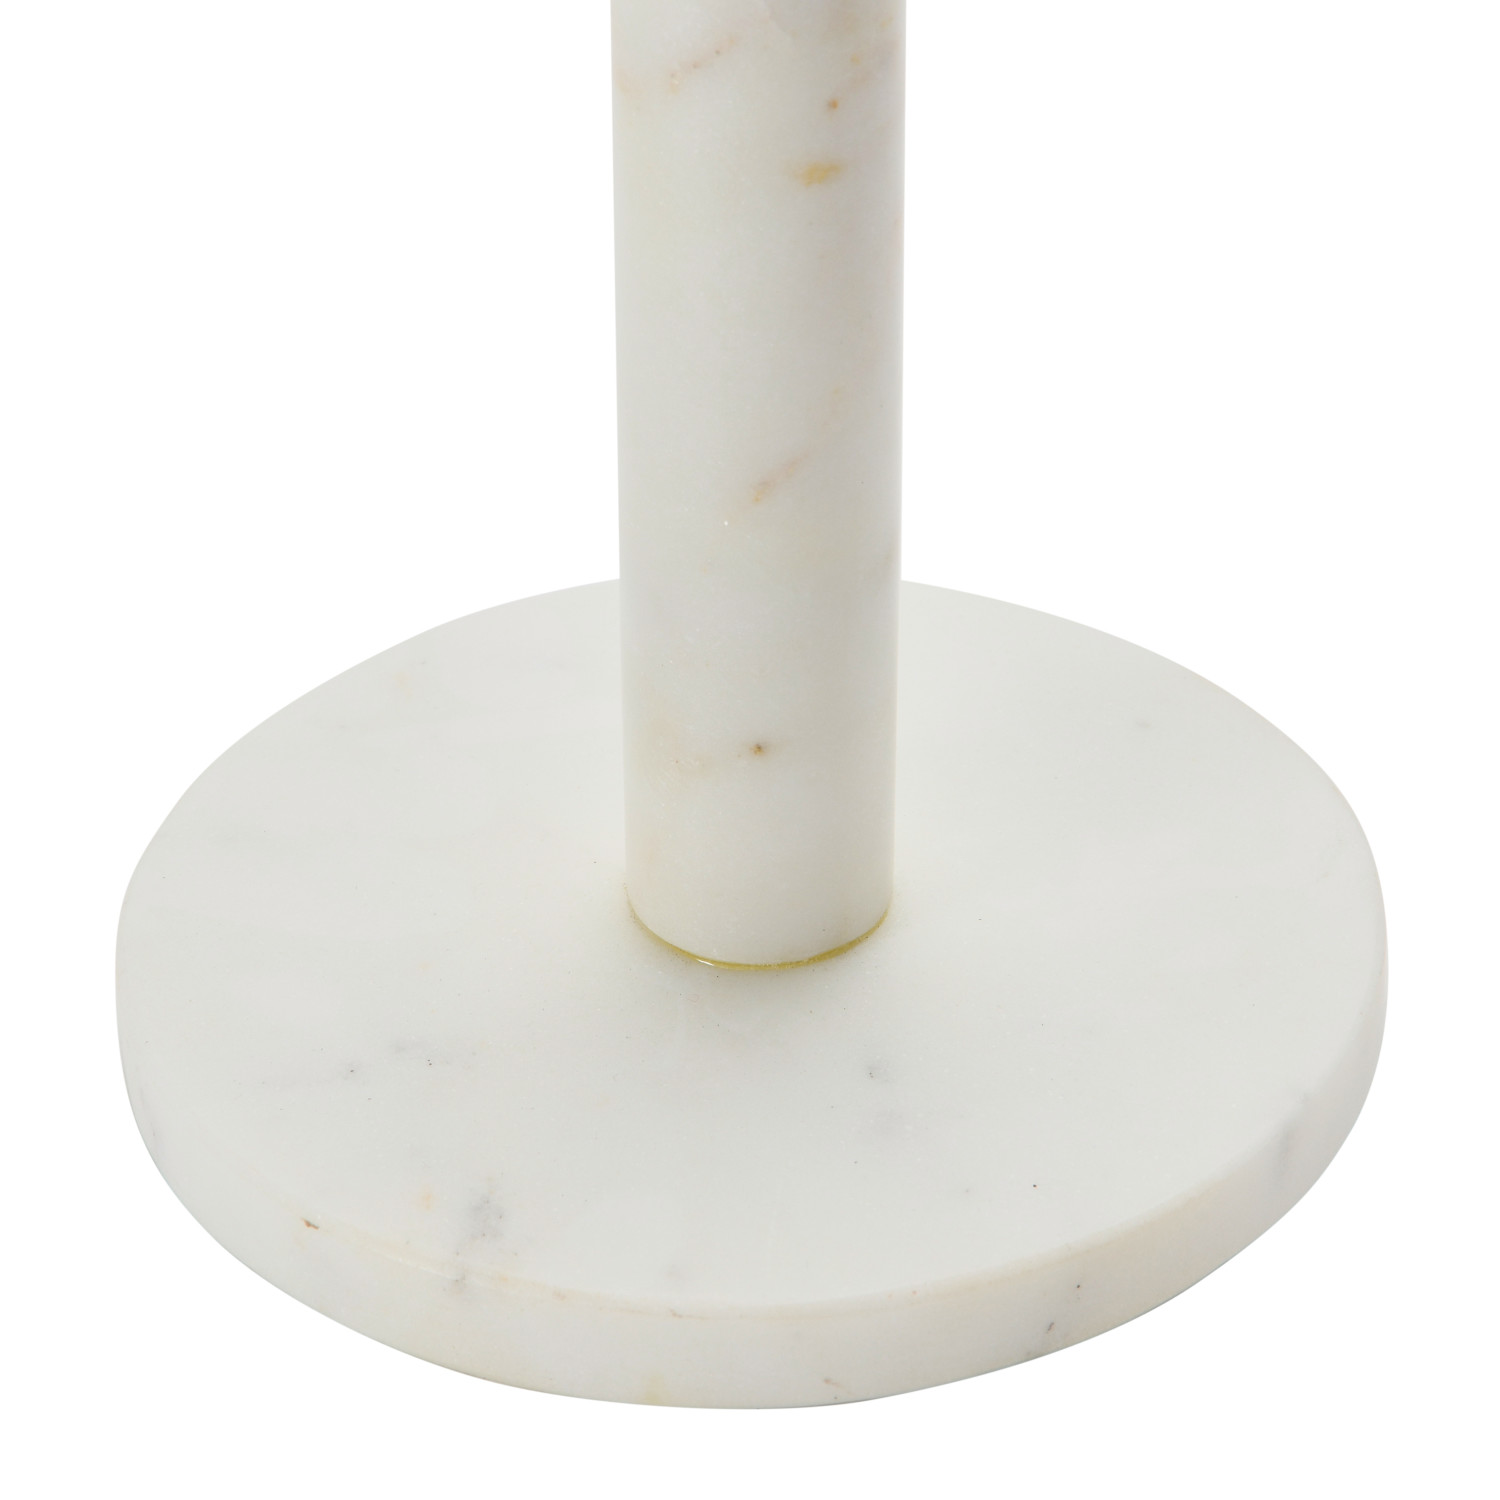 Paper Towel Holder - Beechwood - Marble from Apollo Box